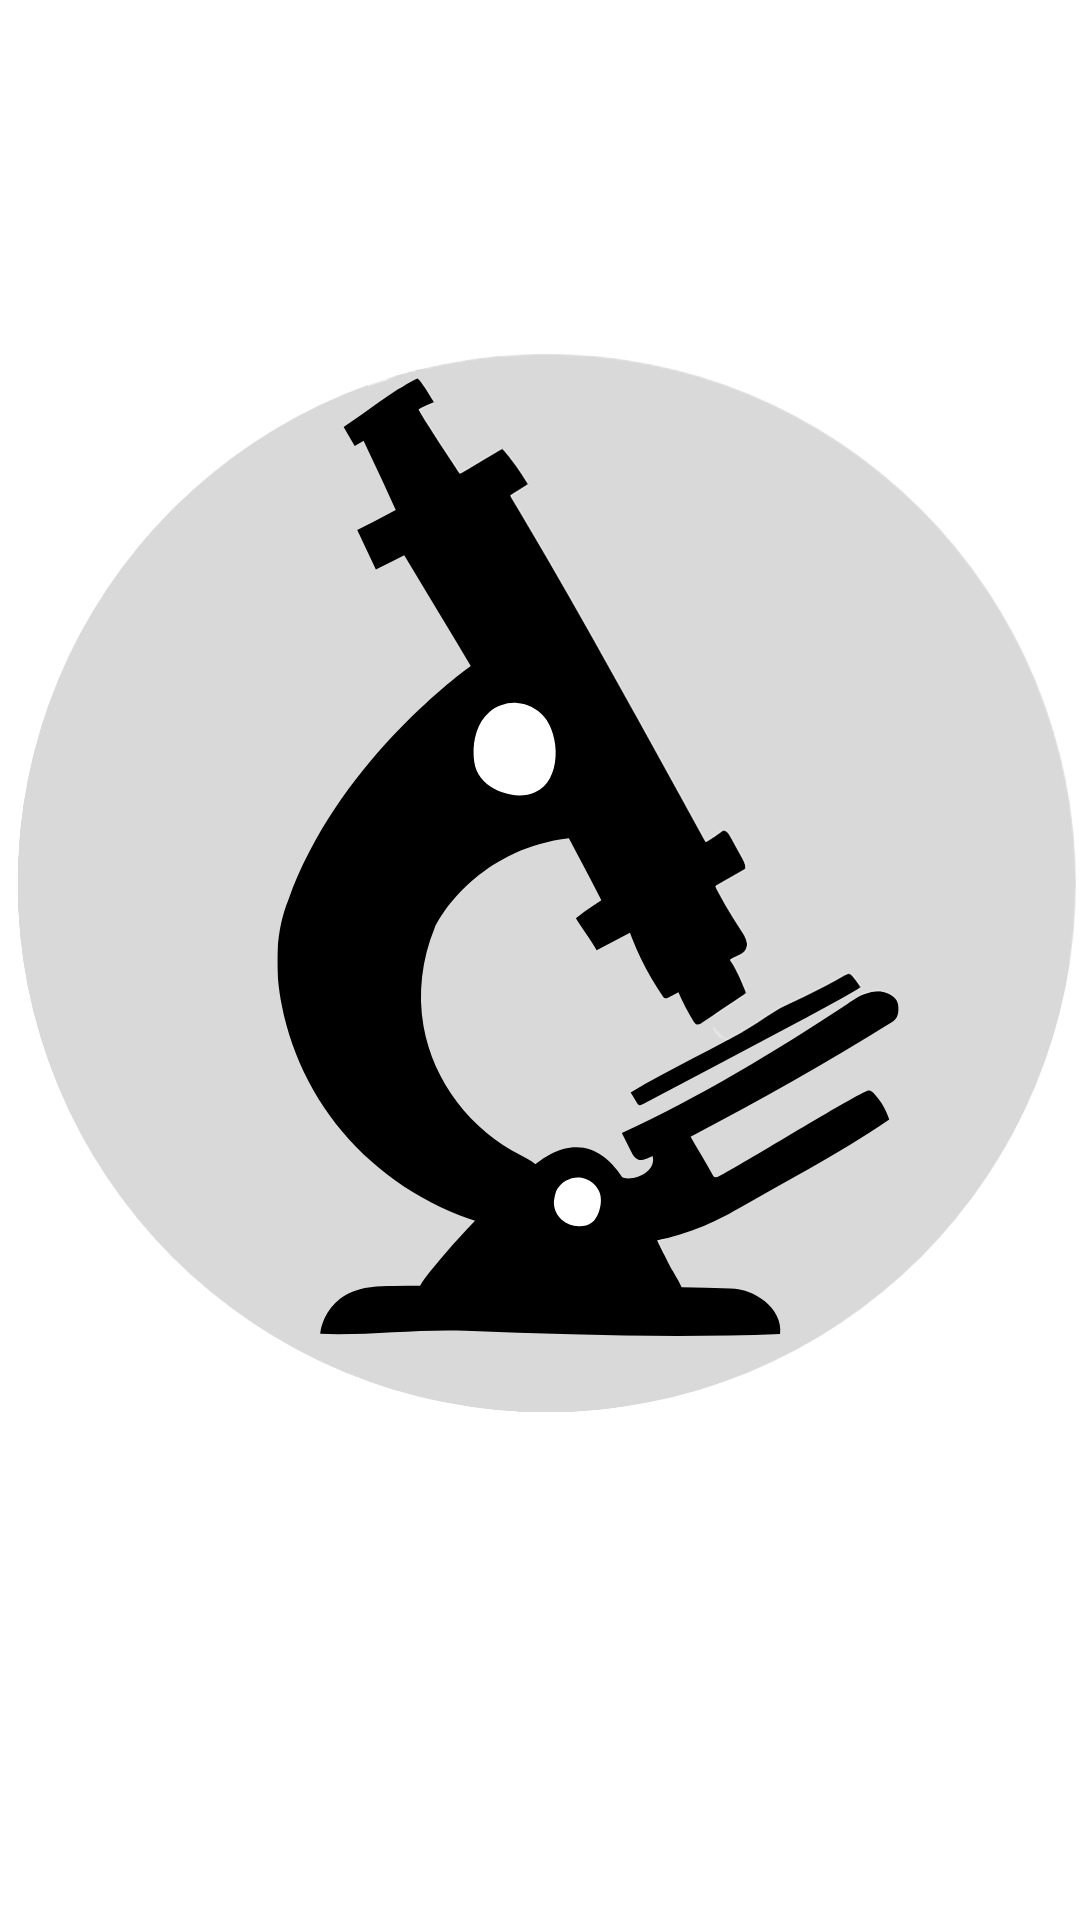 Bold black microscope icon design on a gray light background for scientific and research purposes.